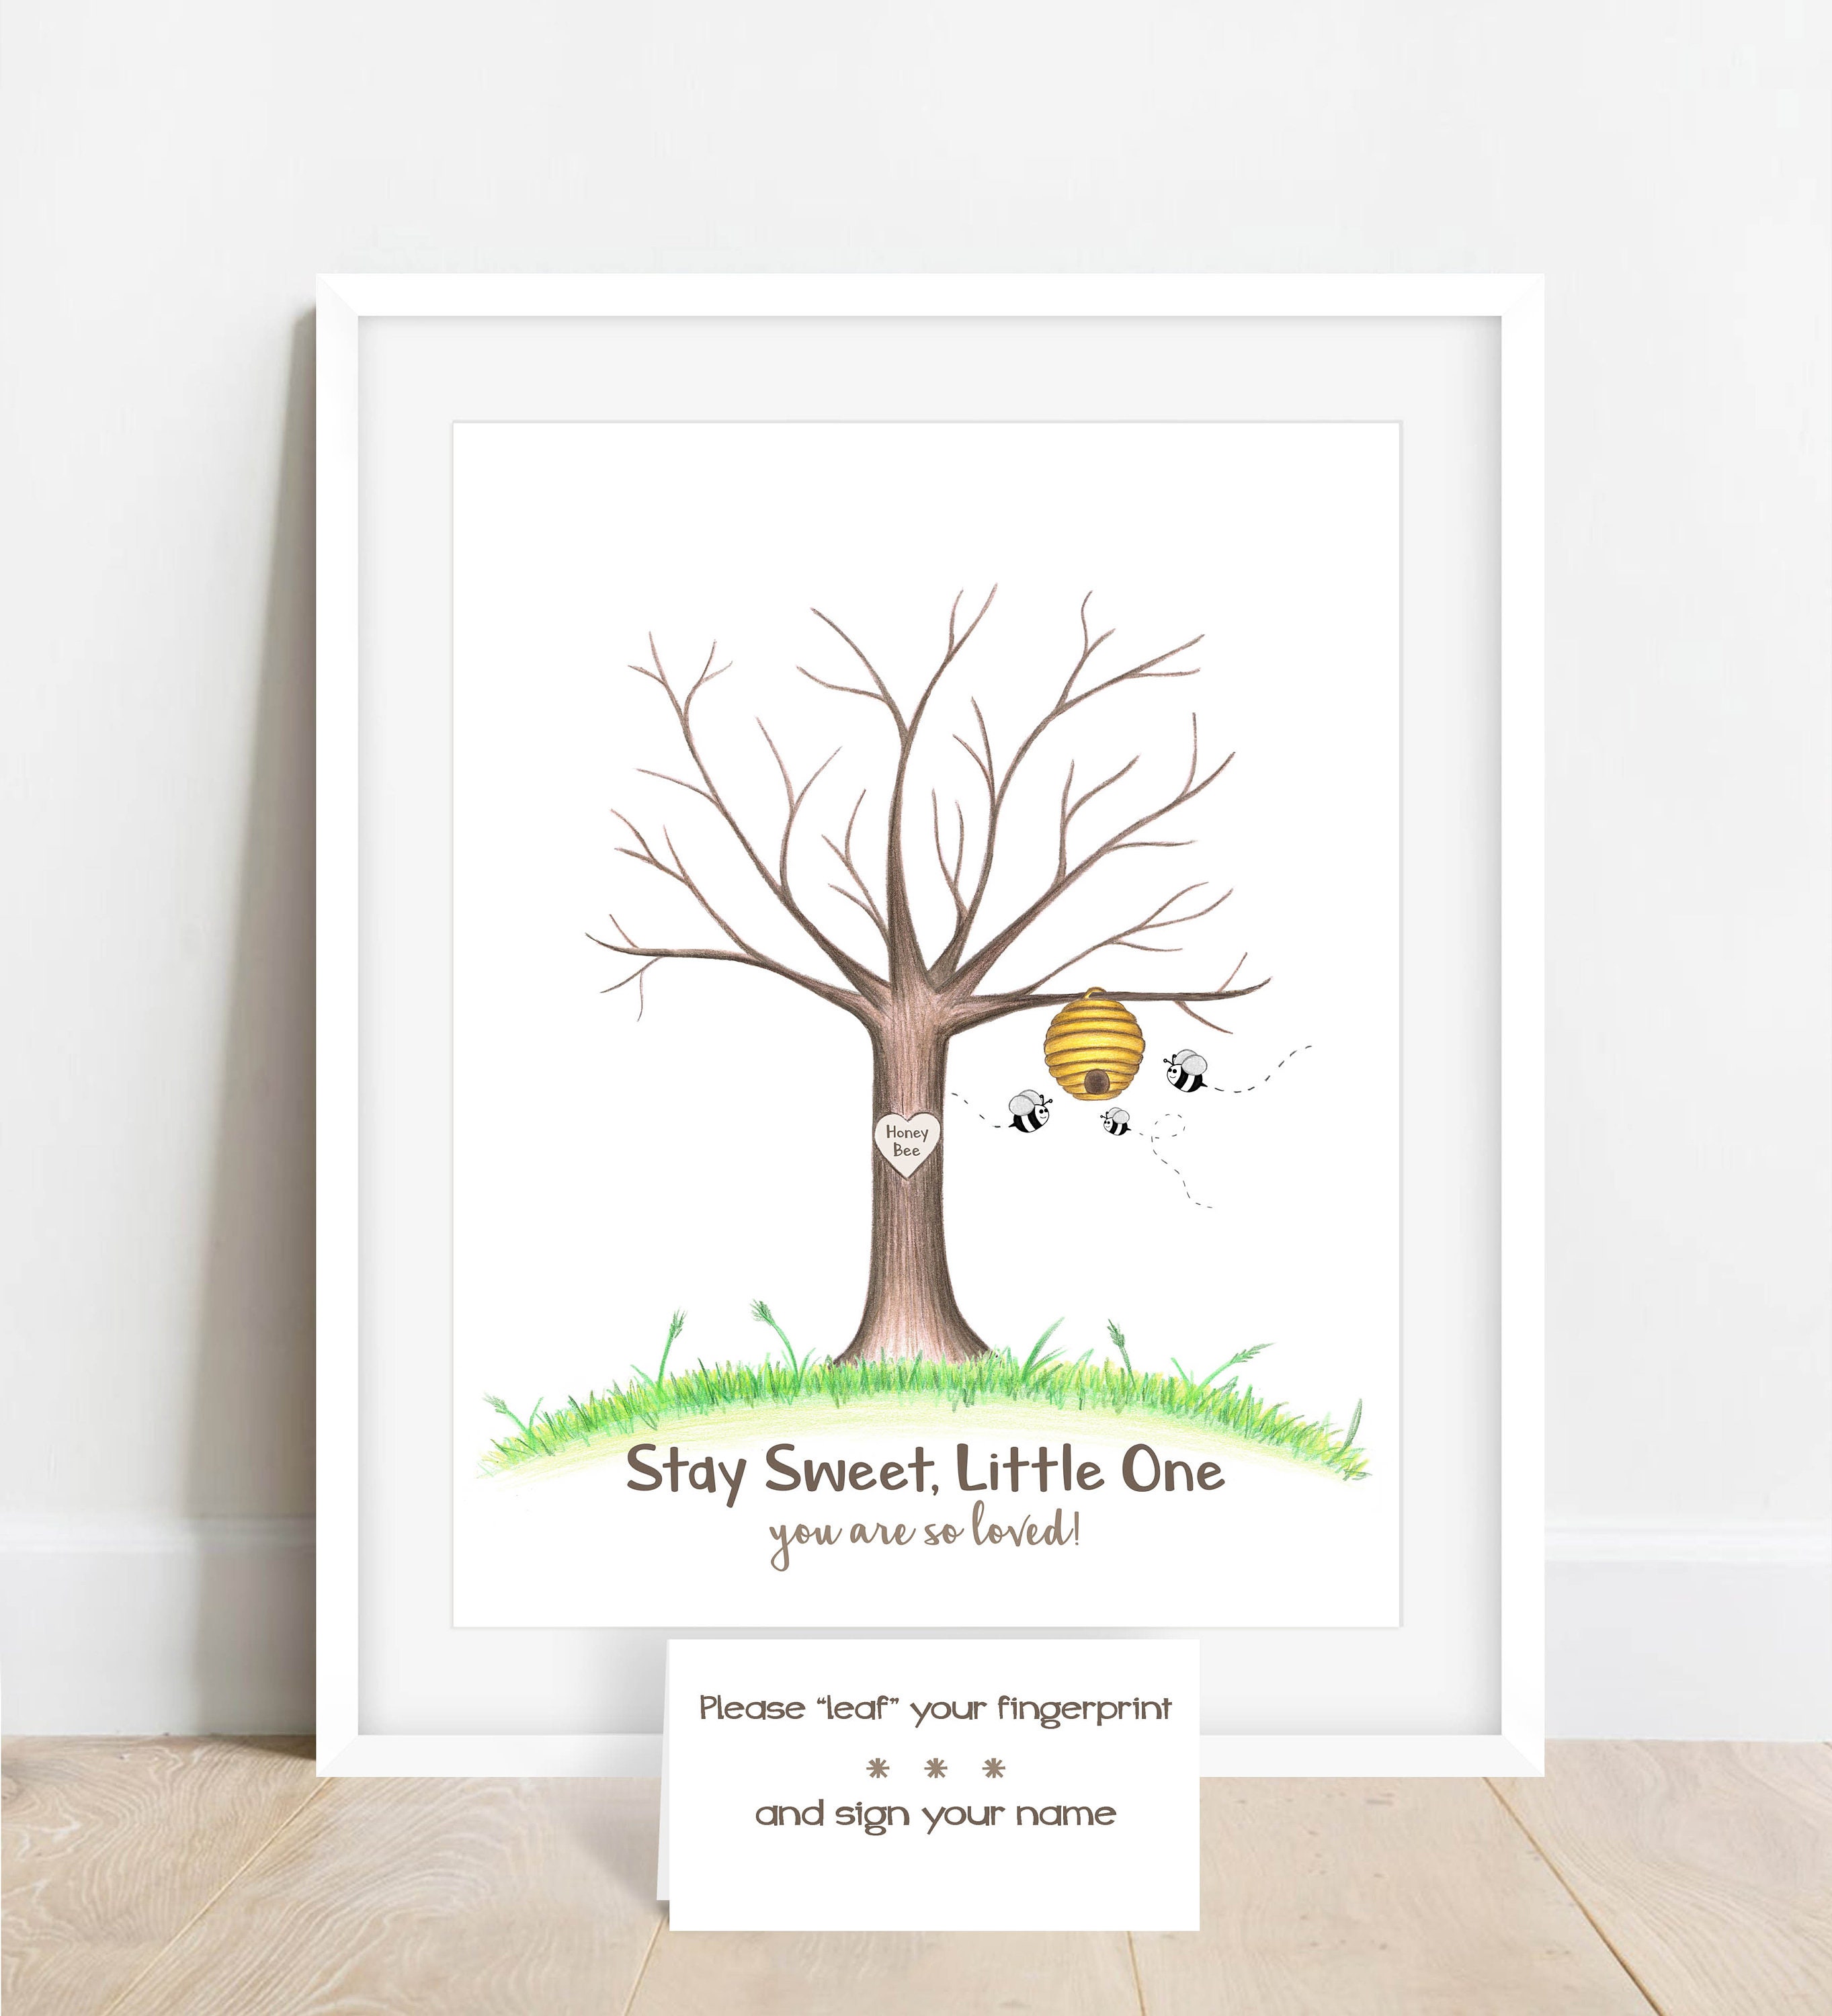 A3 Personalised Fingerprint Tree Guest Book Bees B-day Christening Baby Shower 1 